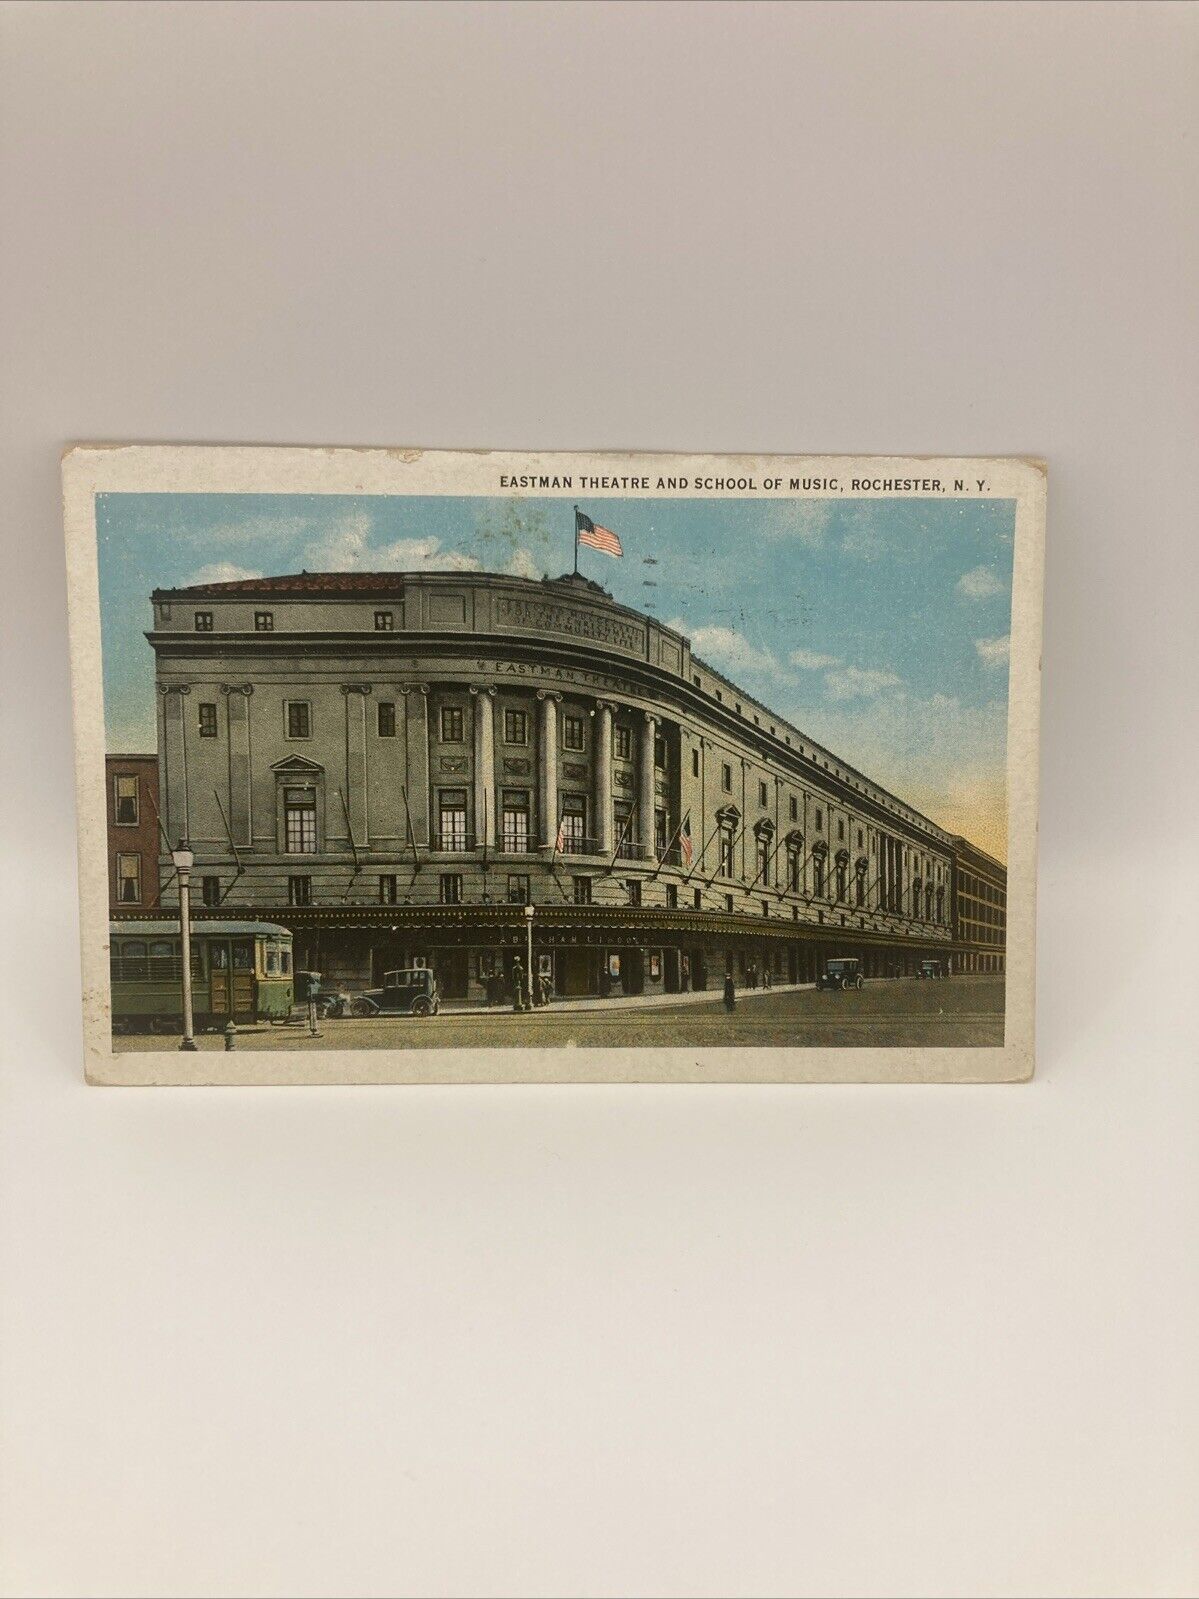 Vintage Postcard Eastman Theatre And School Of Music, Rochester, N.Y.